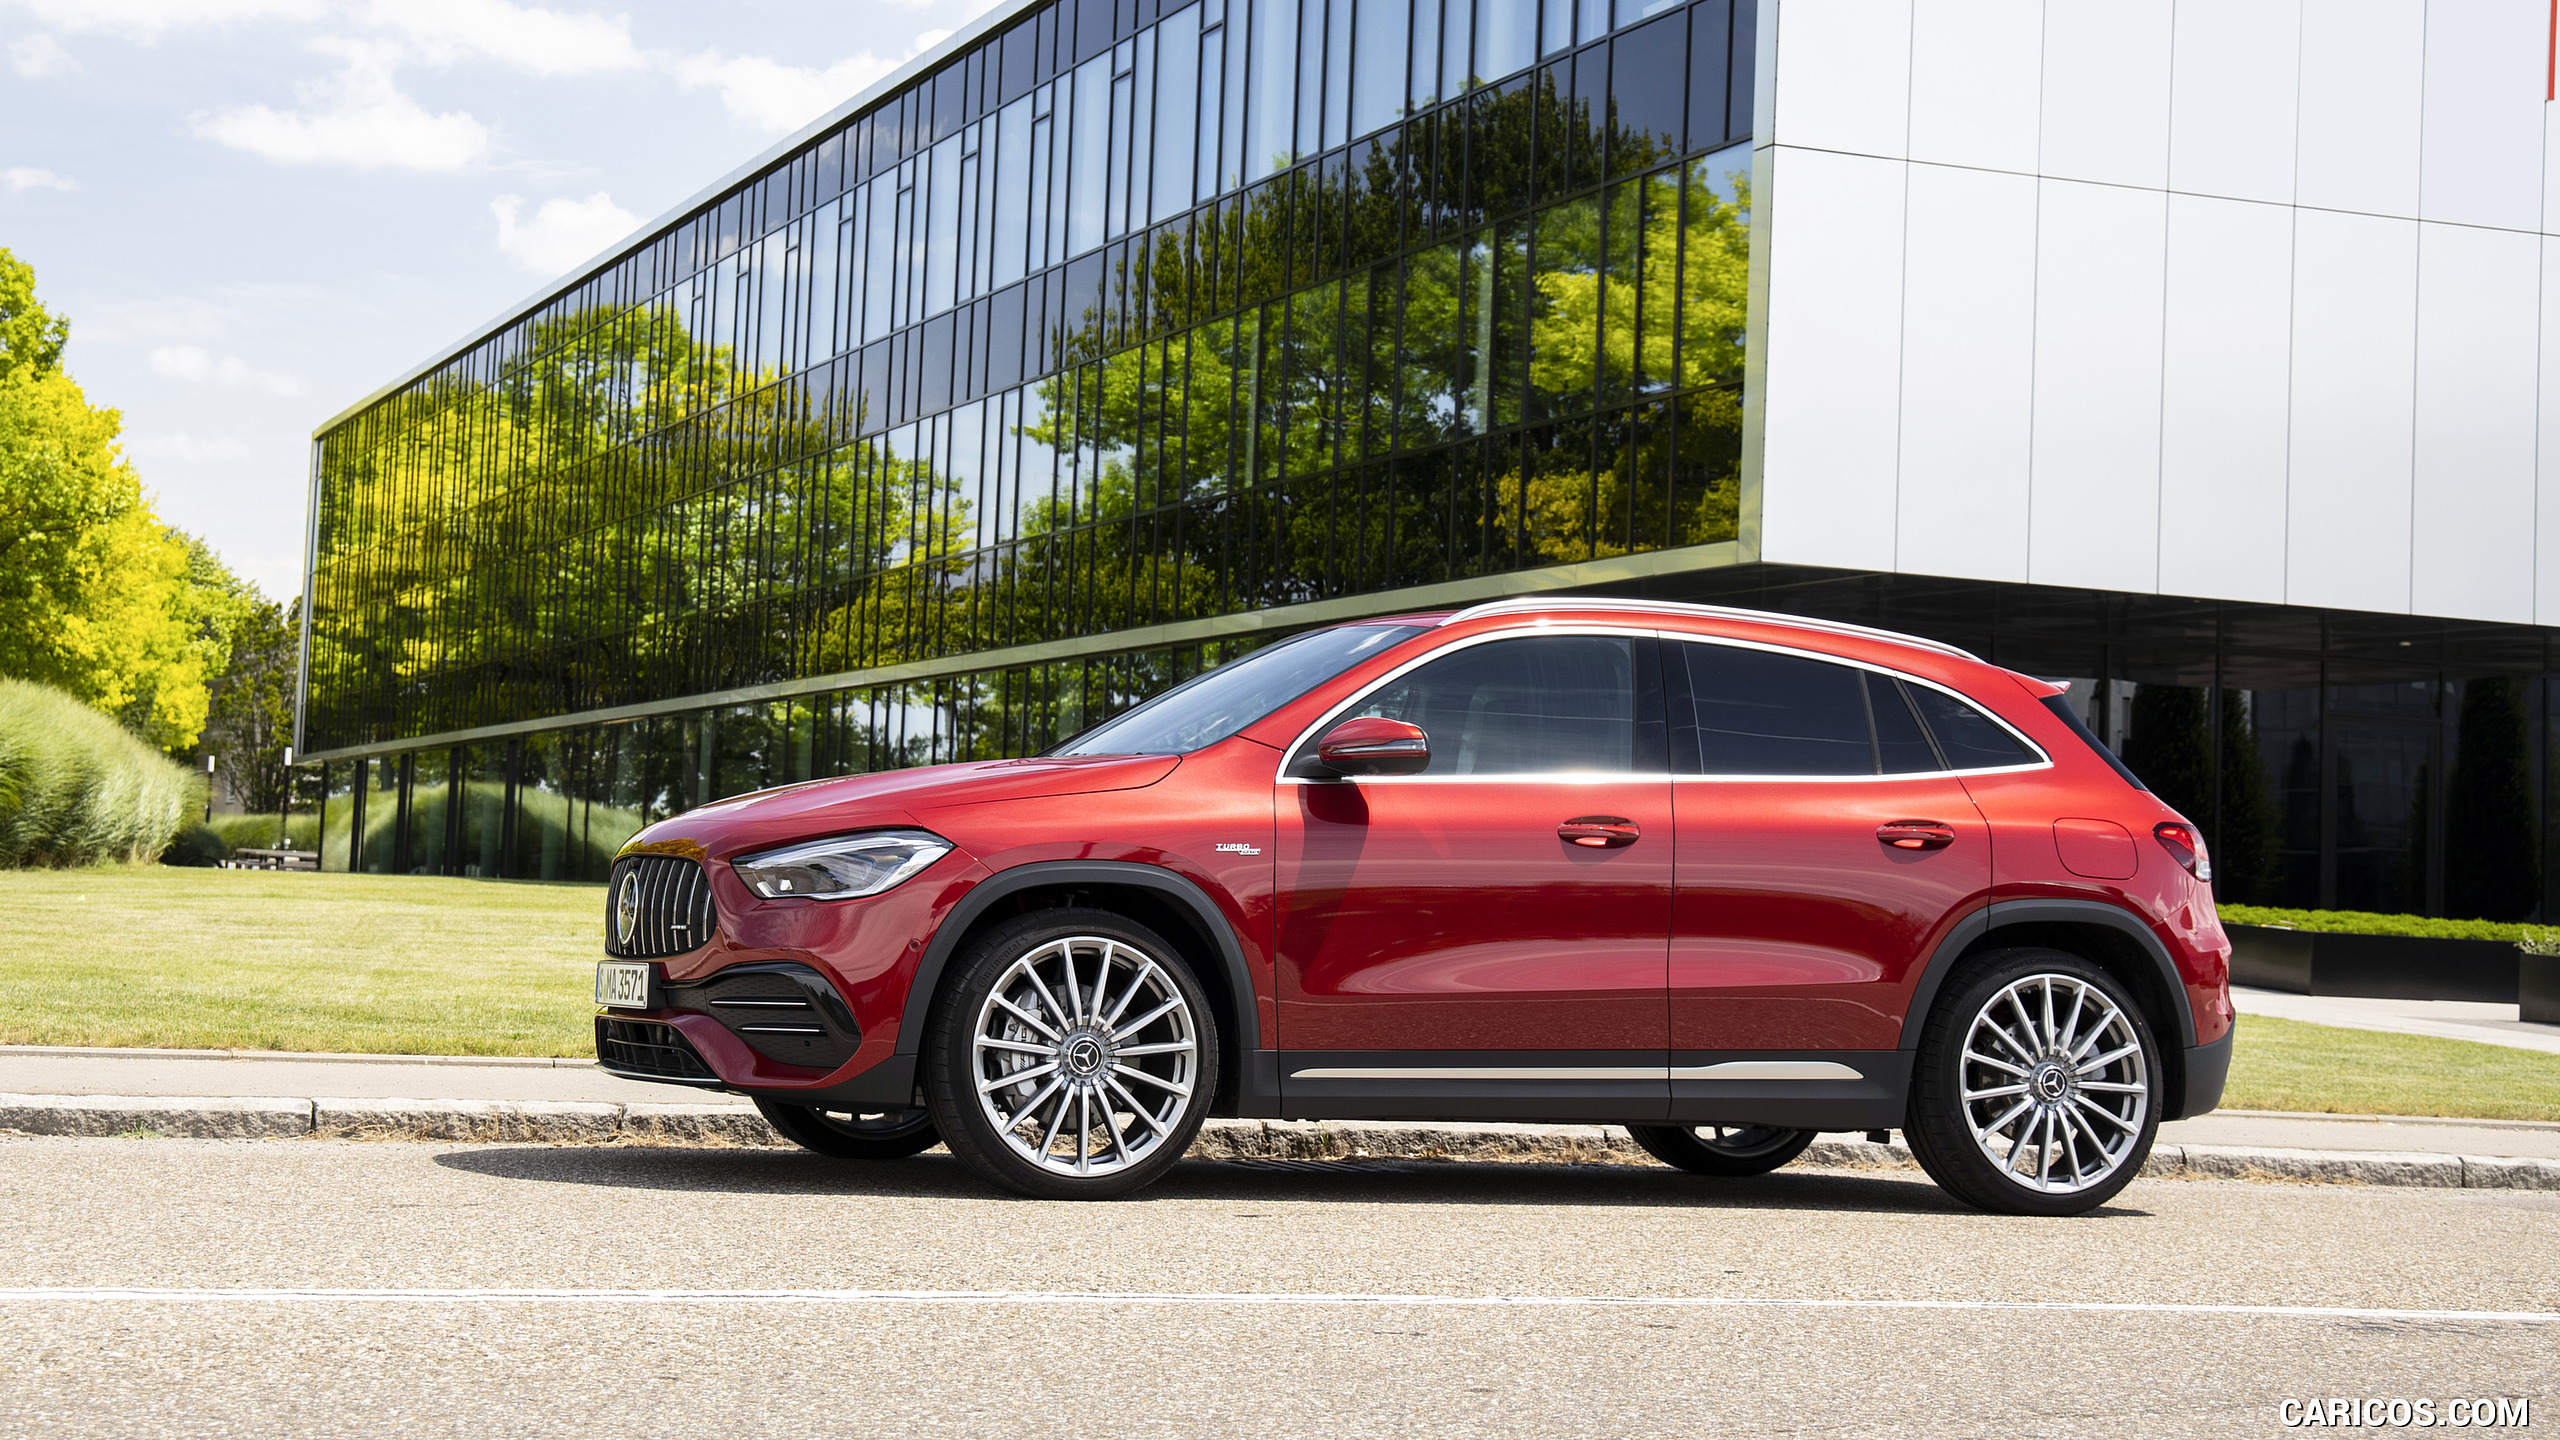 2021 Mercedes-AMG GLA 35 4MATIC (Color: Designo Patagonia Red Metallic) - Side, #42 of 104